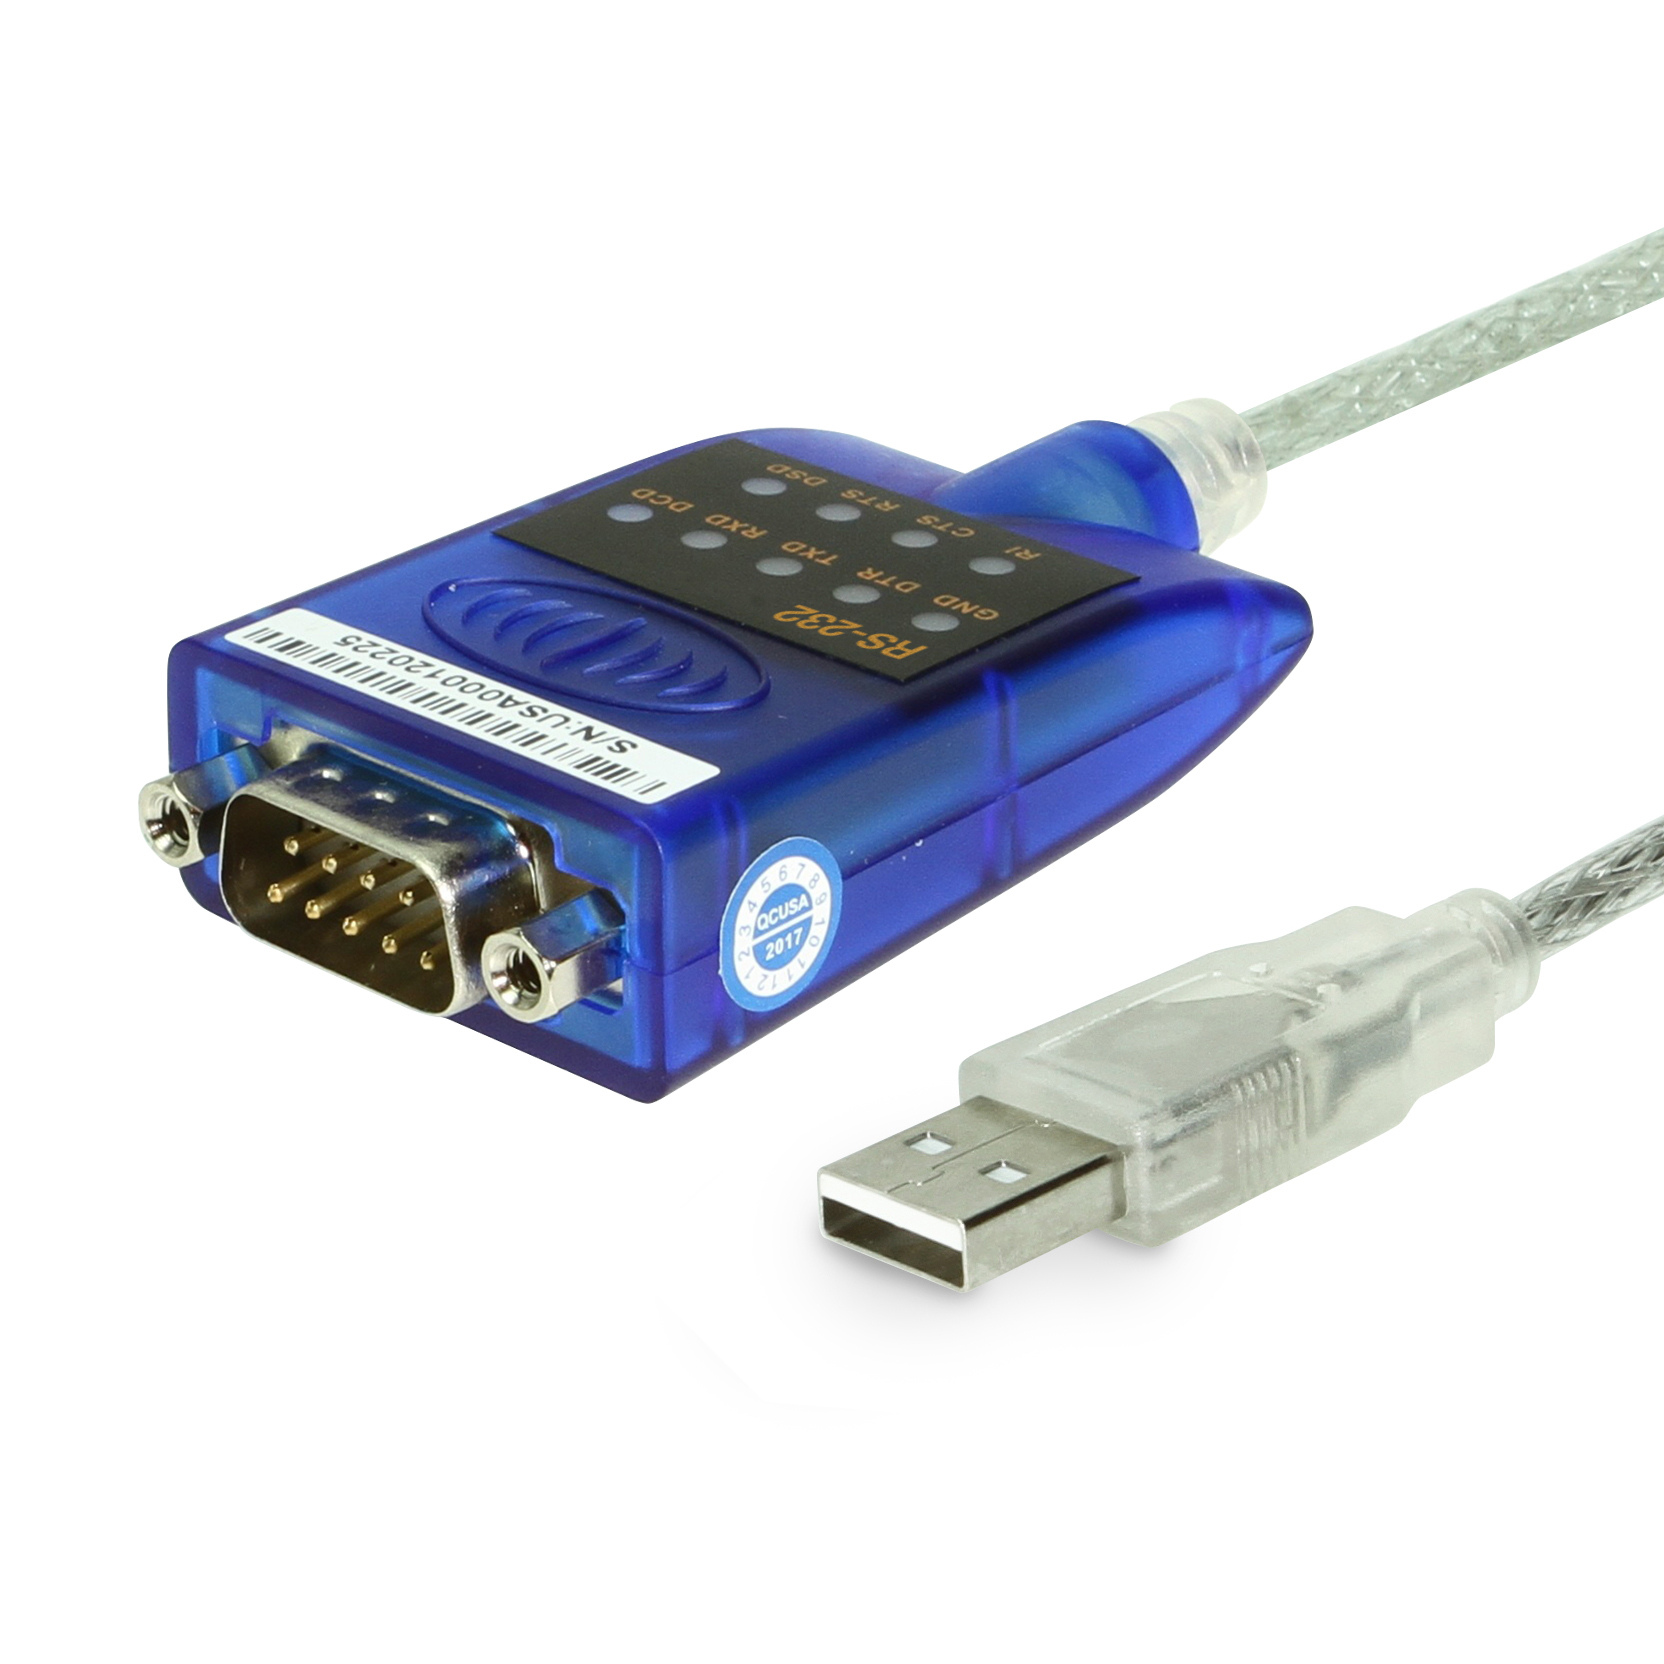 USB 2.0 RS-232 Adapter with LED Indicators